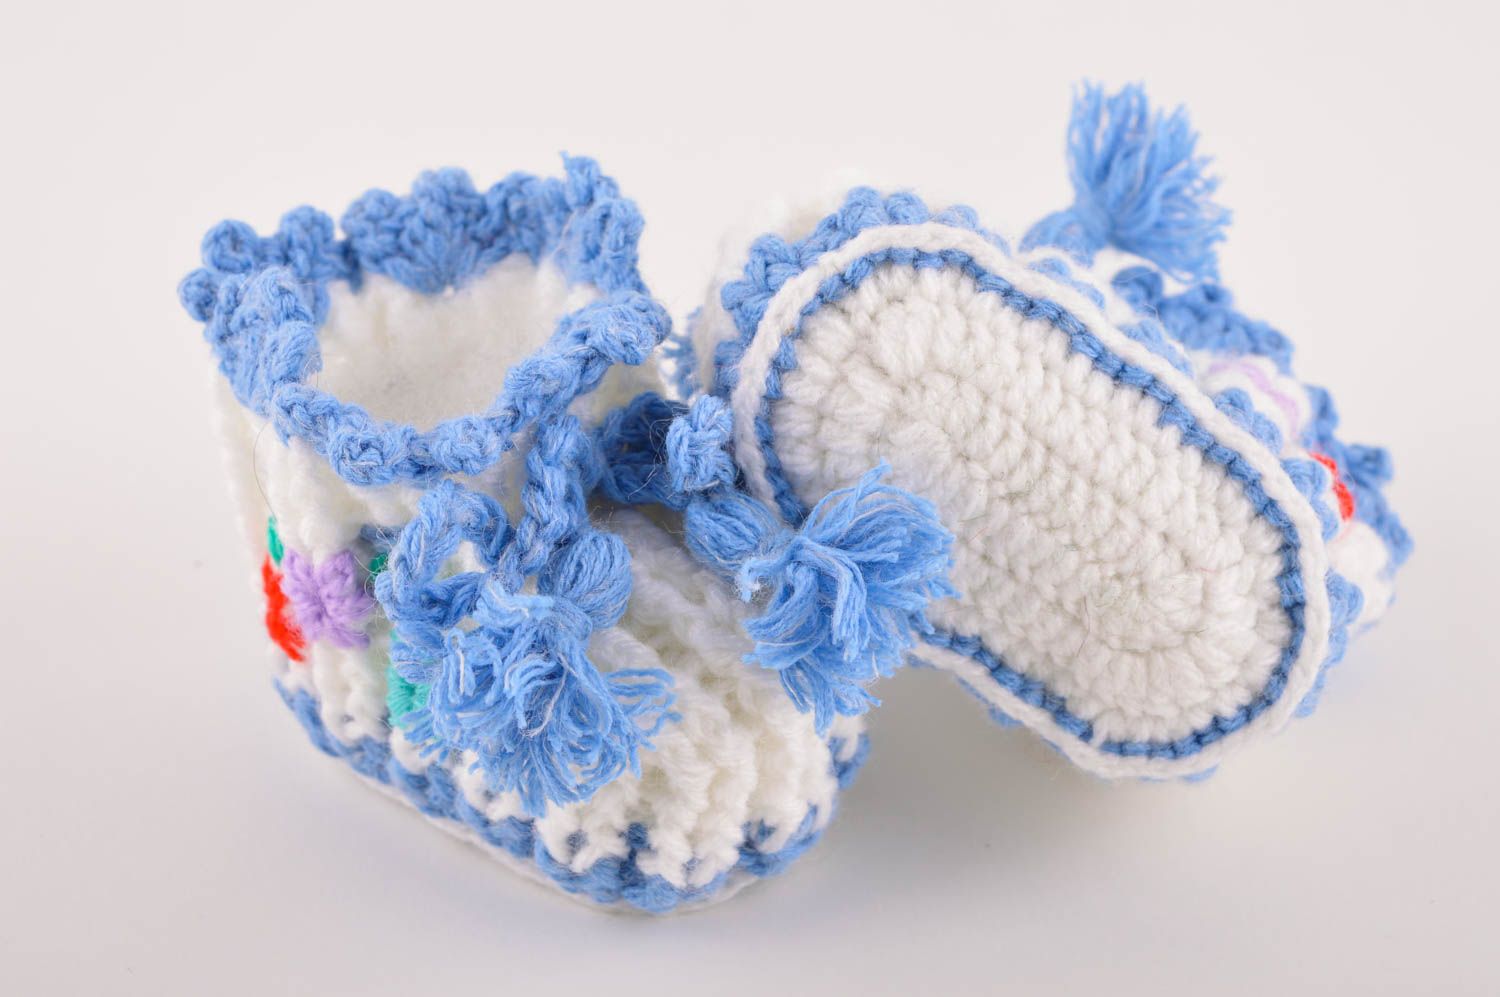 Homemade crochet baby shoes home shoes toddler shoes goods for toddlers photo 4